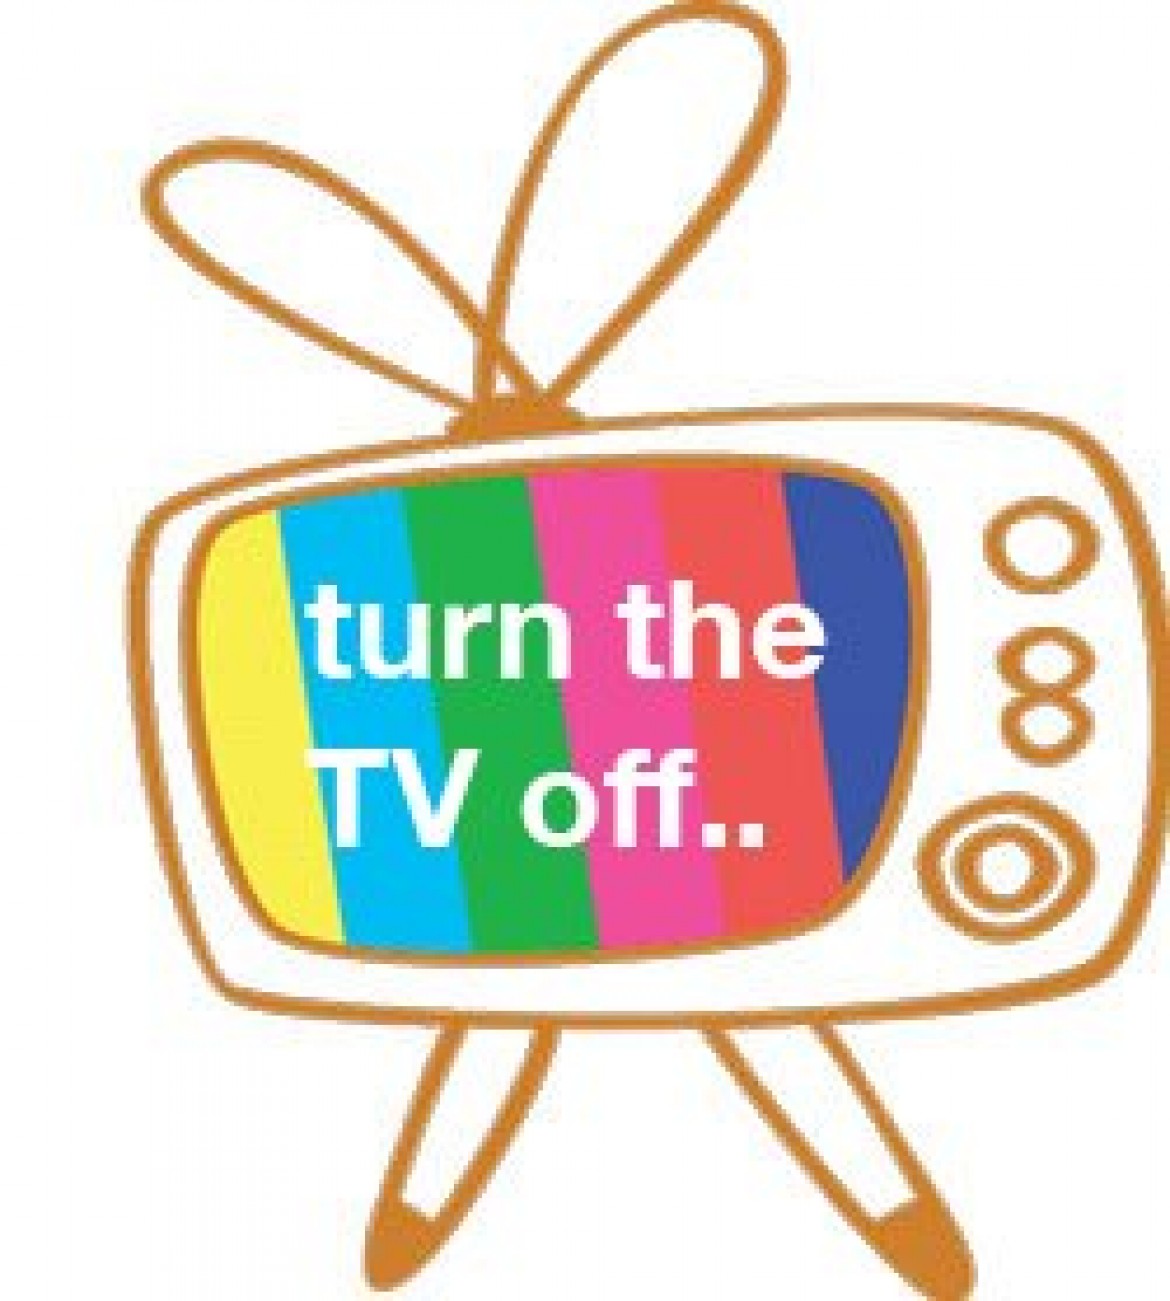 Can you turn the tv. Switch off TV картинки для детей. Turn on the TV. Turn on the TV for Kids. Turn on TV Clipart.